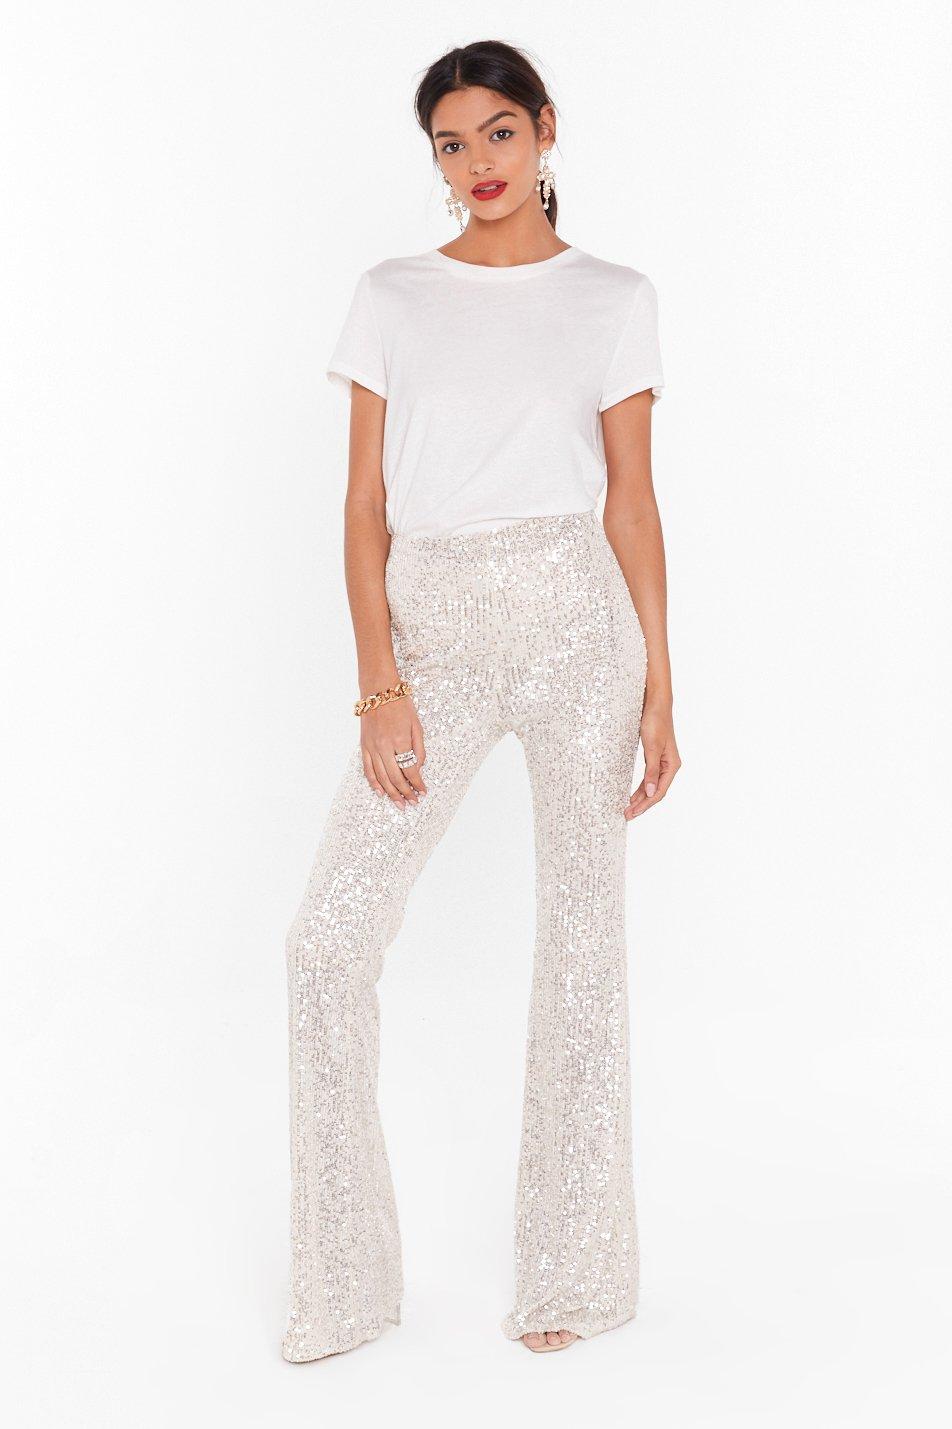 sequin flare pants